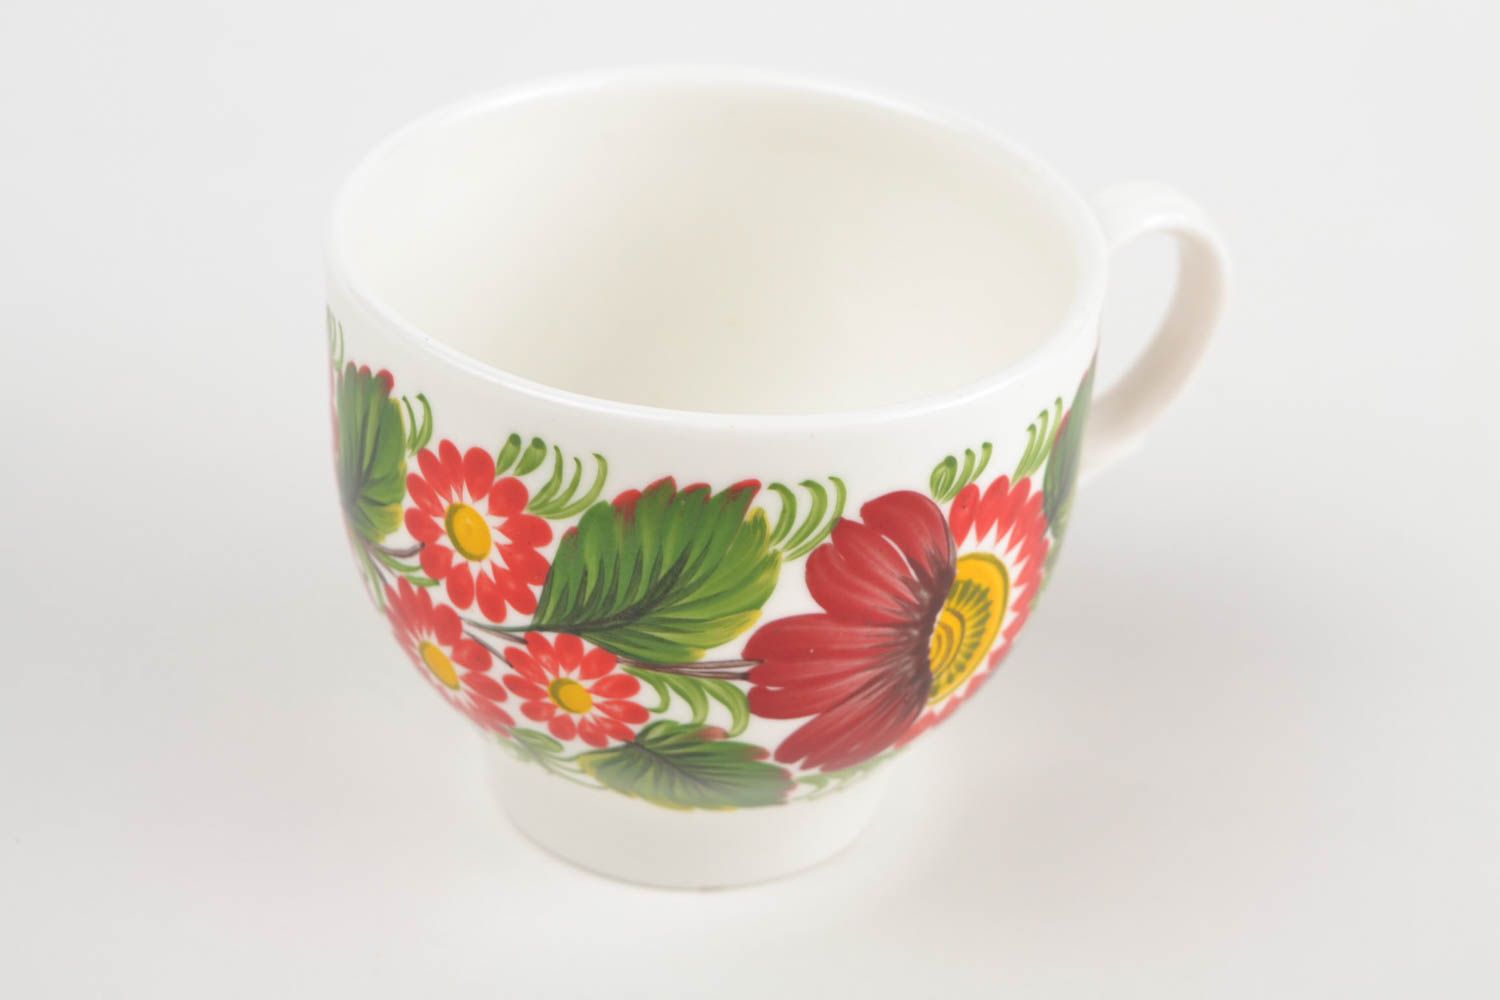 7 oz porcelain tea cup in white, green, red floral design with handle photo 5